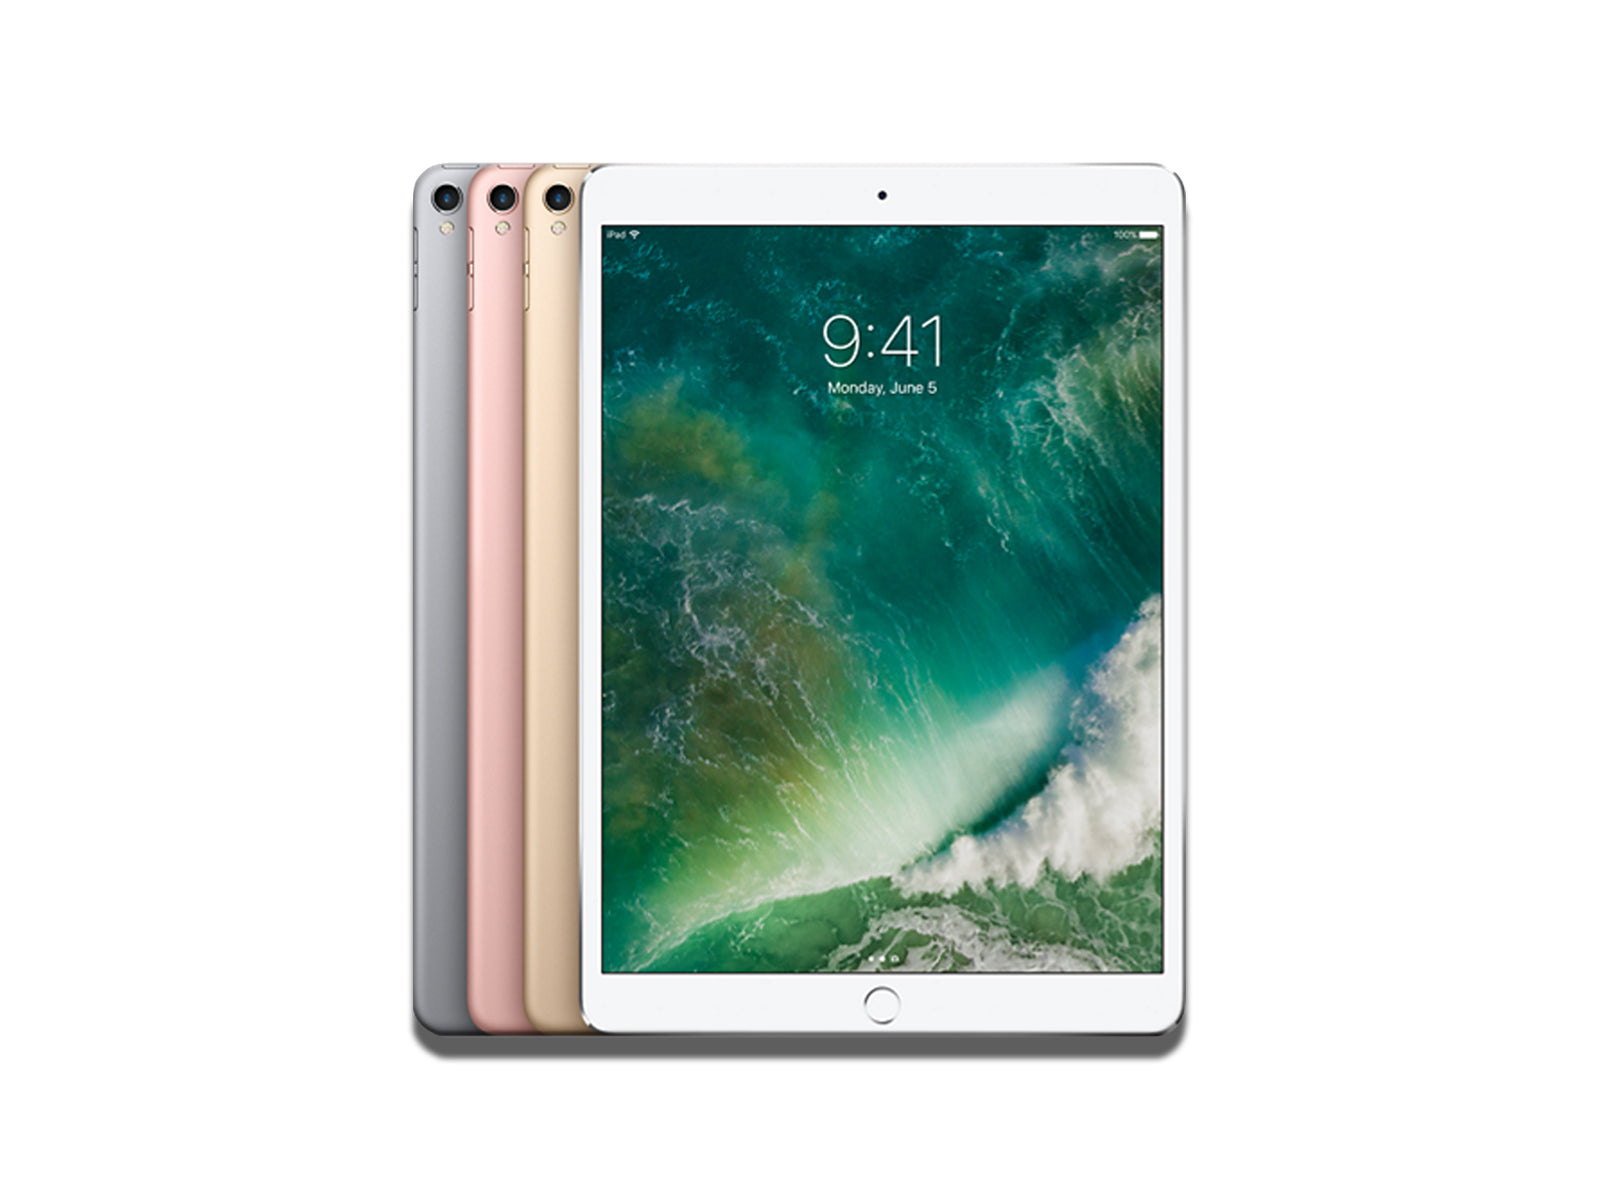 iPad 10.5 Inch 2nd Gen In Colours Silver, Rose Gold And Gold